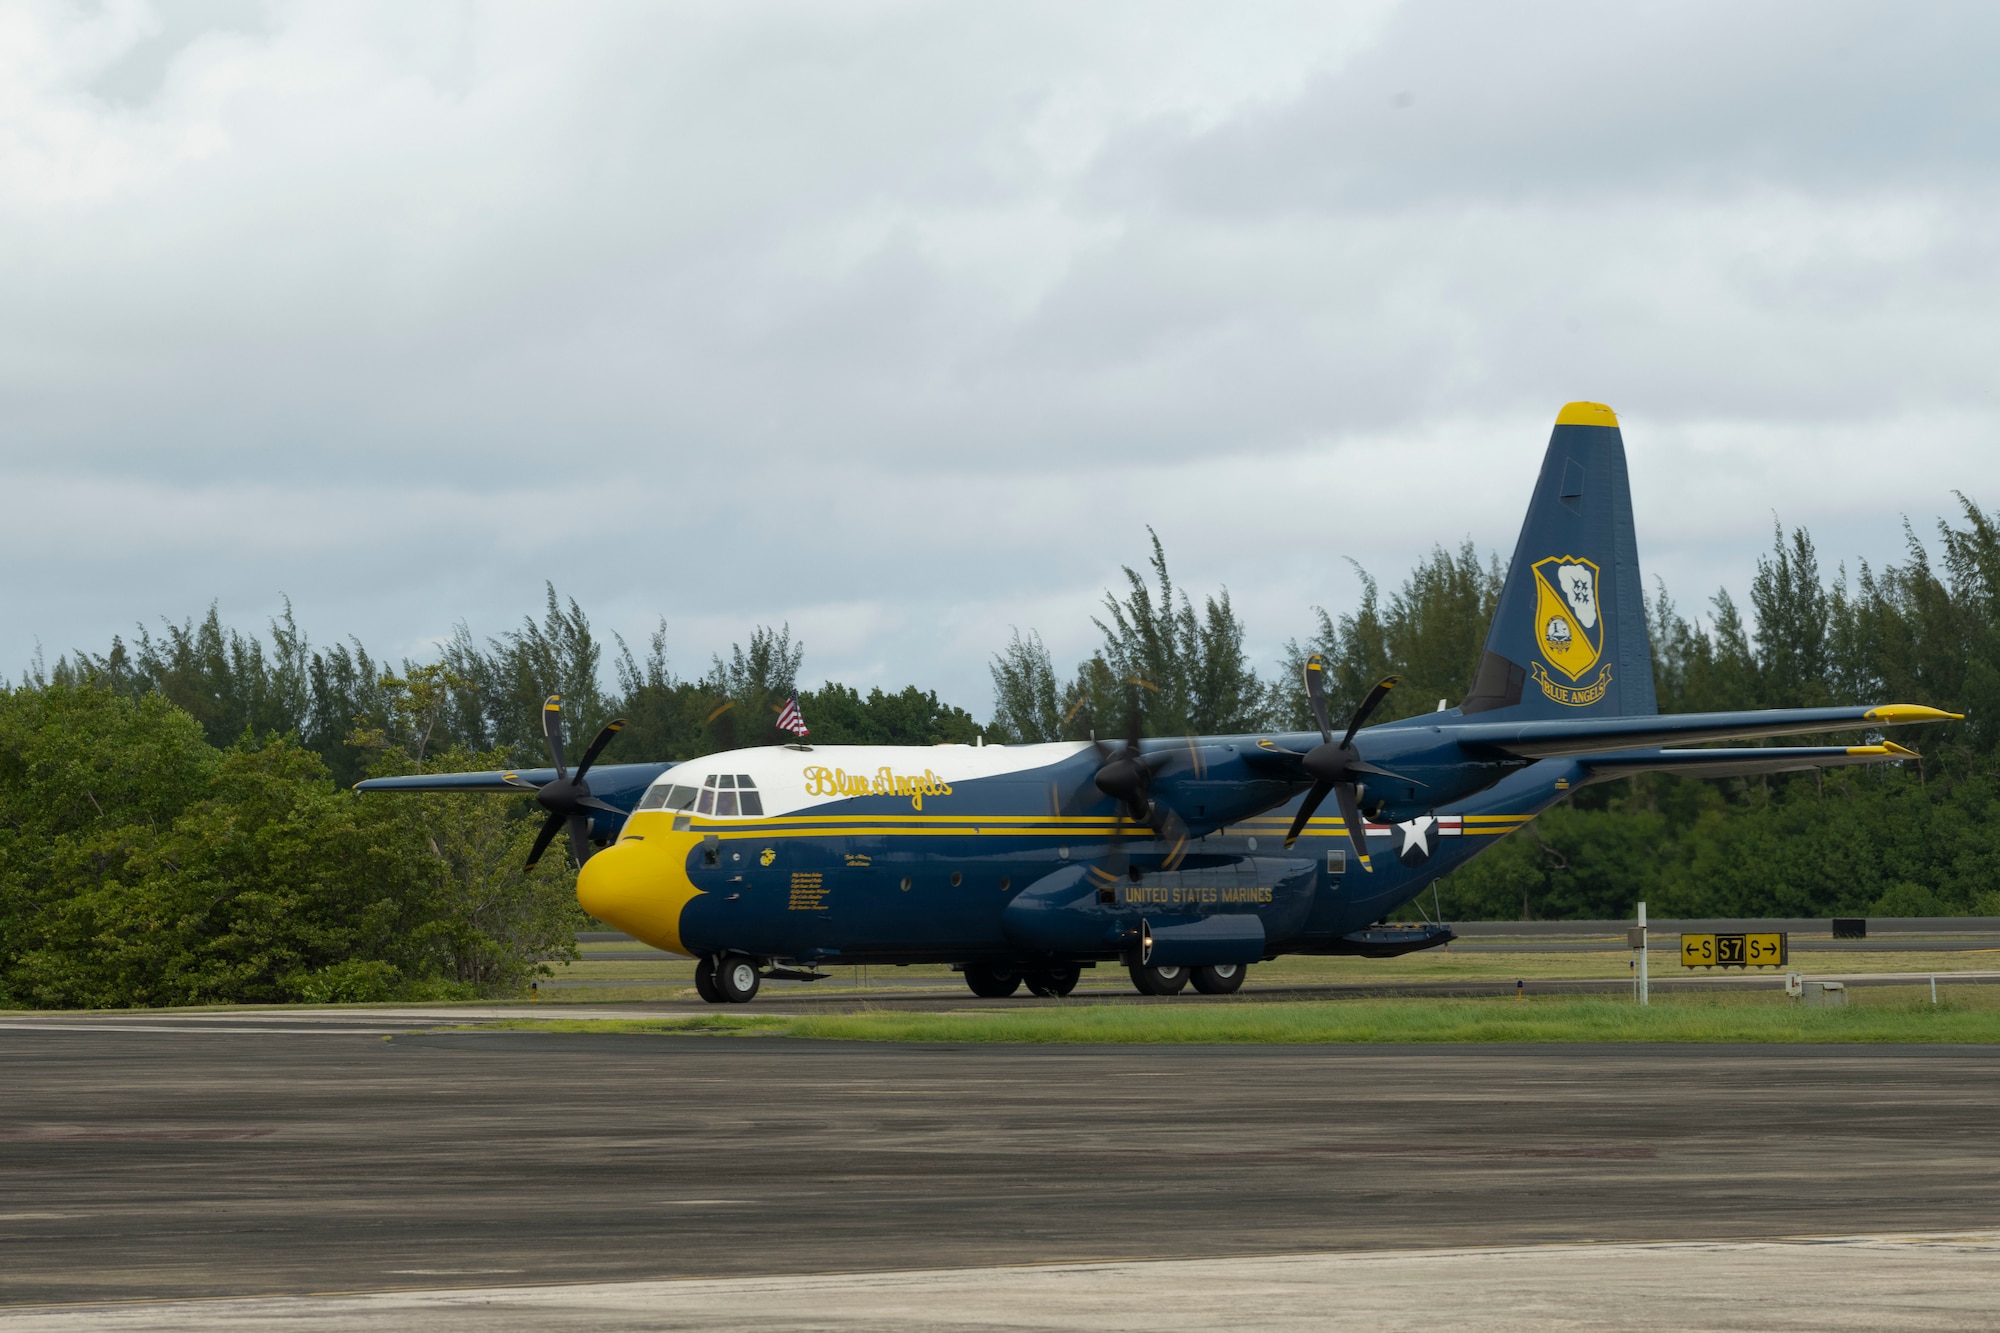 A C-130J Super Hercules “Fat Albert” assigned to the U.S. Navy Flight Demonstration Squadron, the Blue Angels, arrives at the 156th Wing airfield, Muñiz Air National Guard Base, Carolina, Puerto Rico, Dec. 15 2023. The Puerto Rico Air National Guard supported the U.S. Navy Blue Angels in a campaign with Toys for Tots, which impacted communities across the Island in an effort to distribute more than 20,000 toys to local children during the holiday season. (U.S. Air National Guard photo by Airman 1st Class Victoria Jewett)